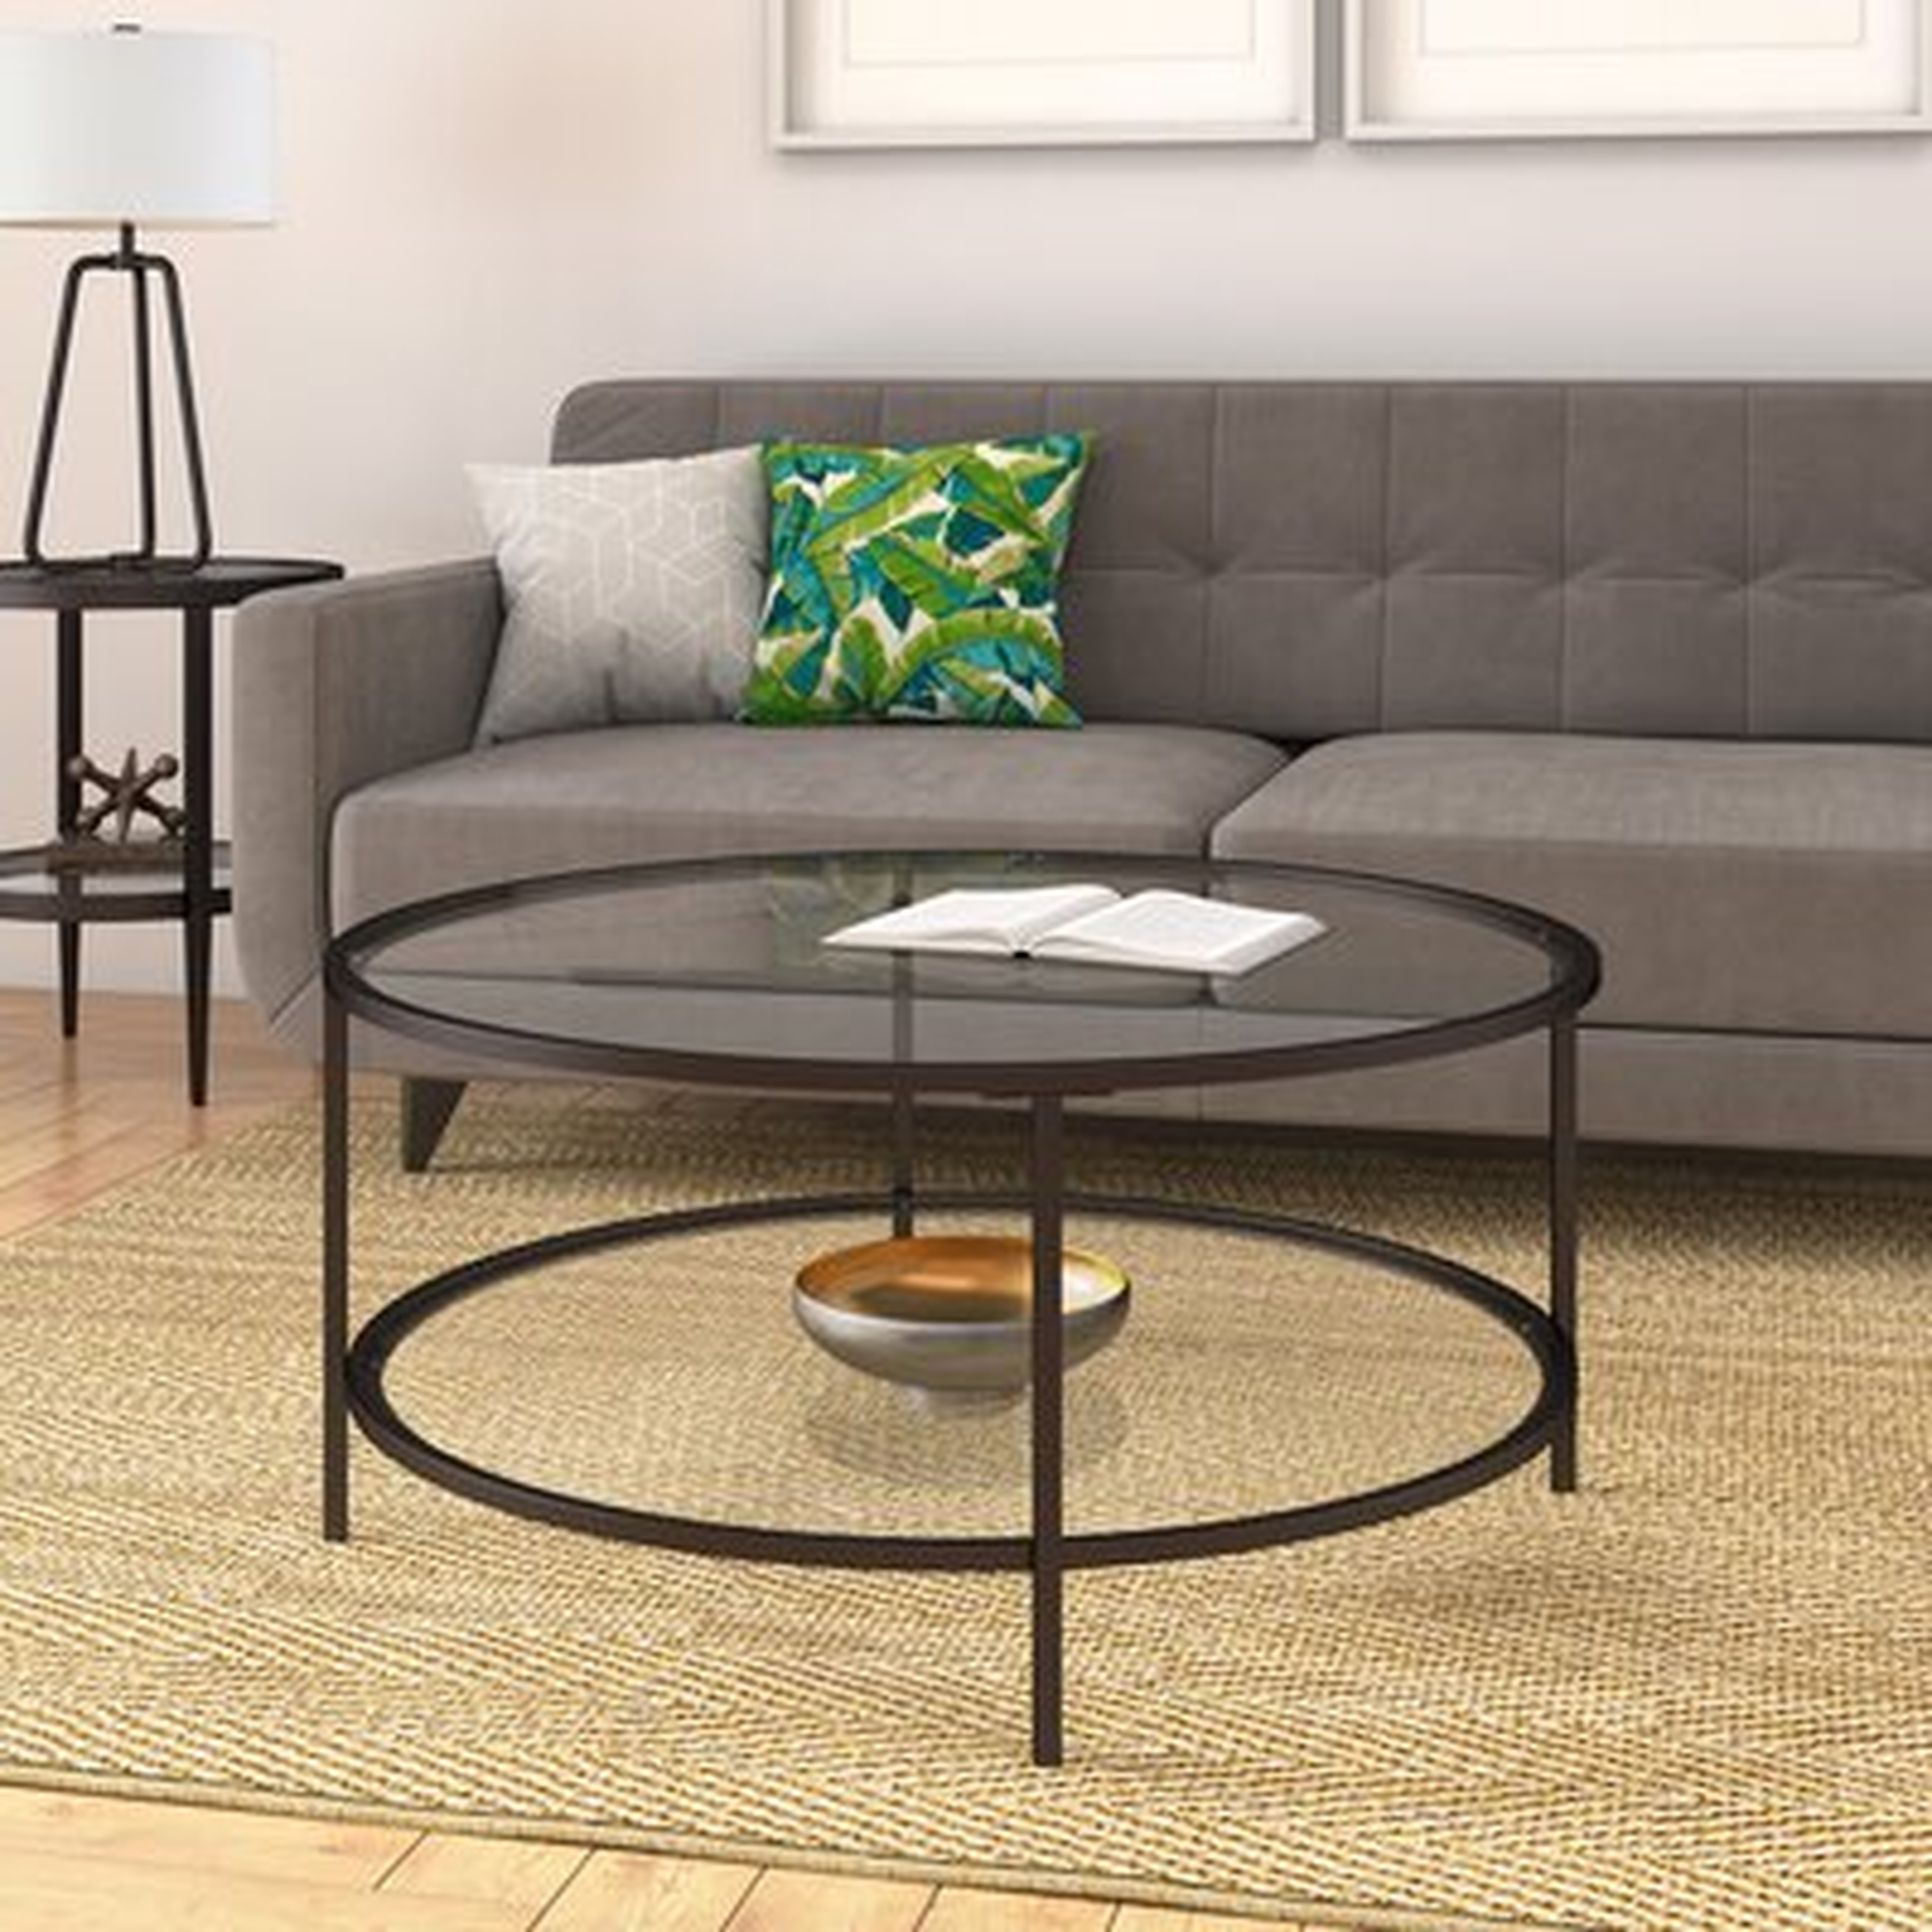 Magdalen Coffee Table with Storage - Wayfair